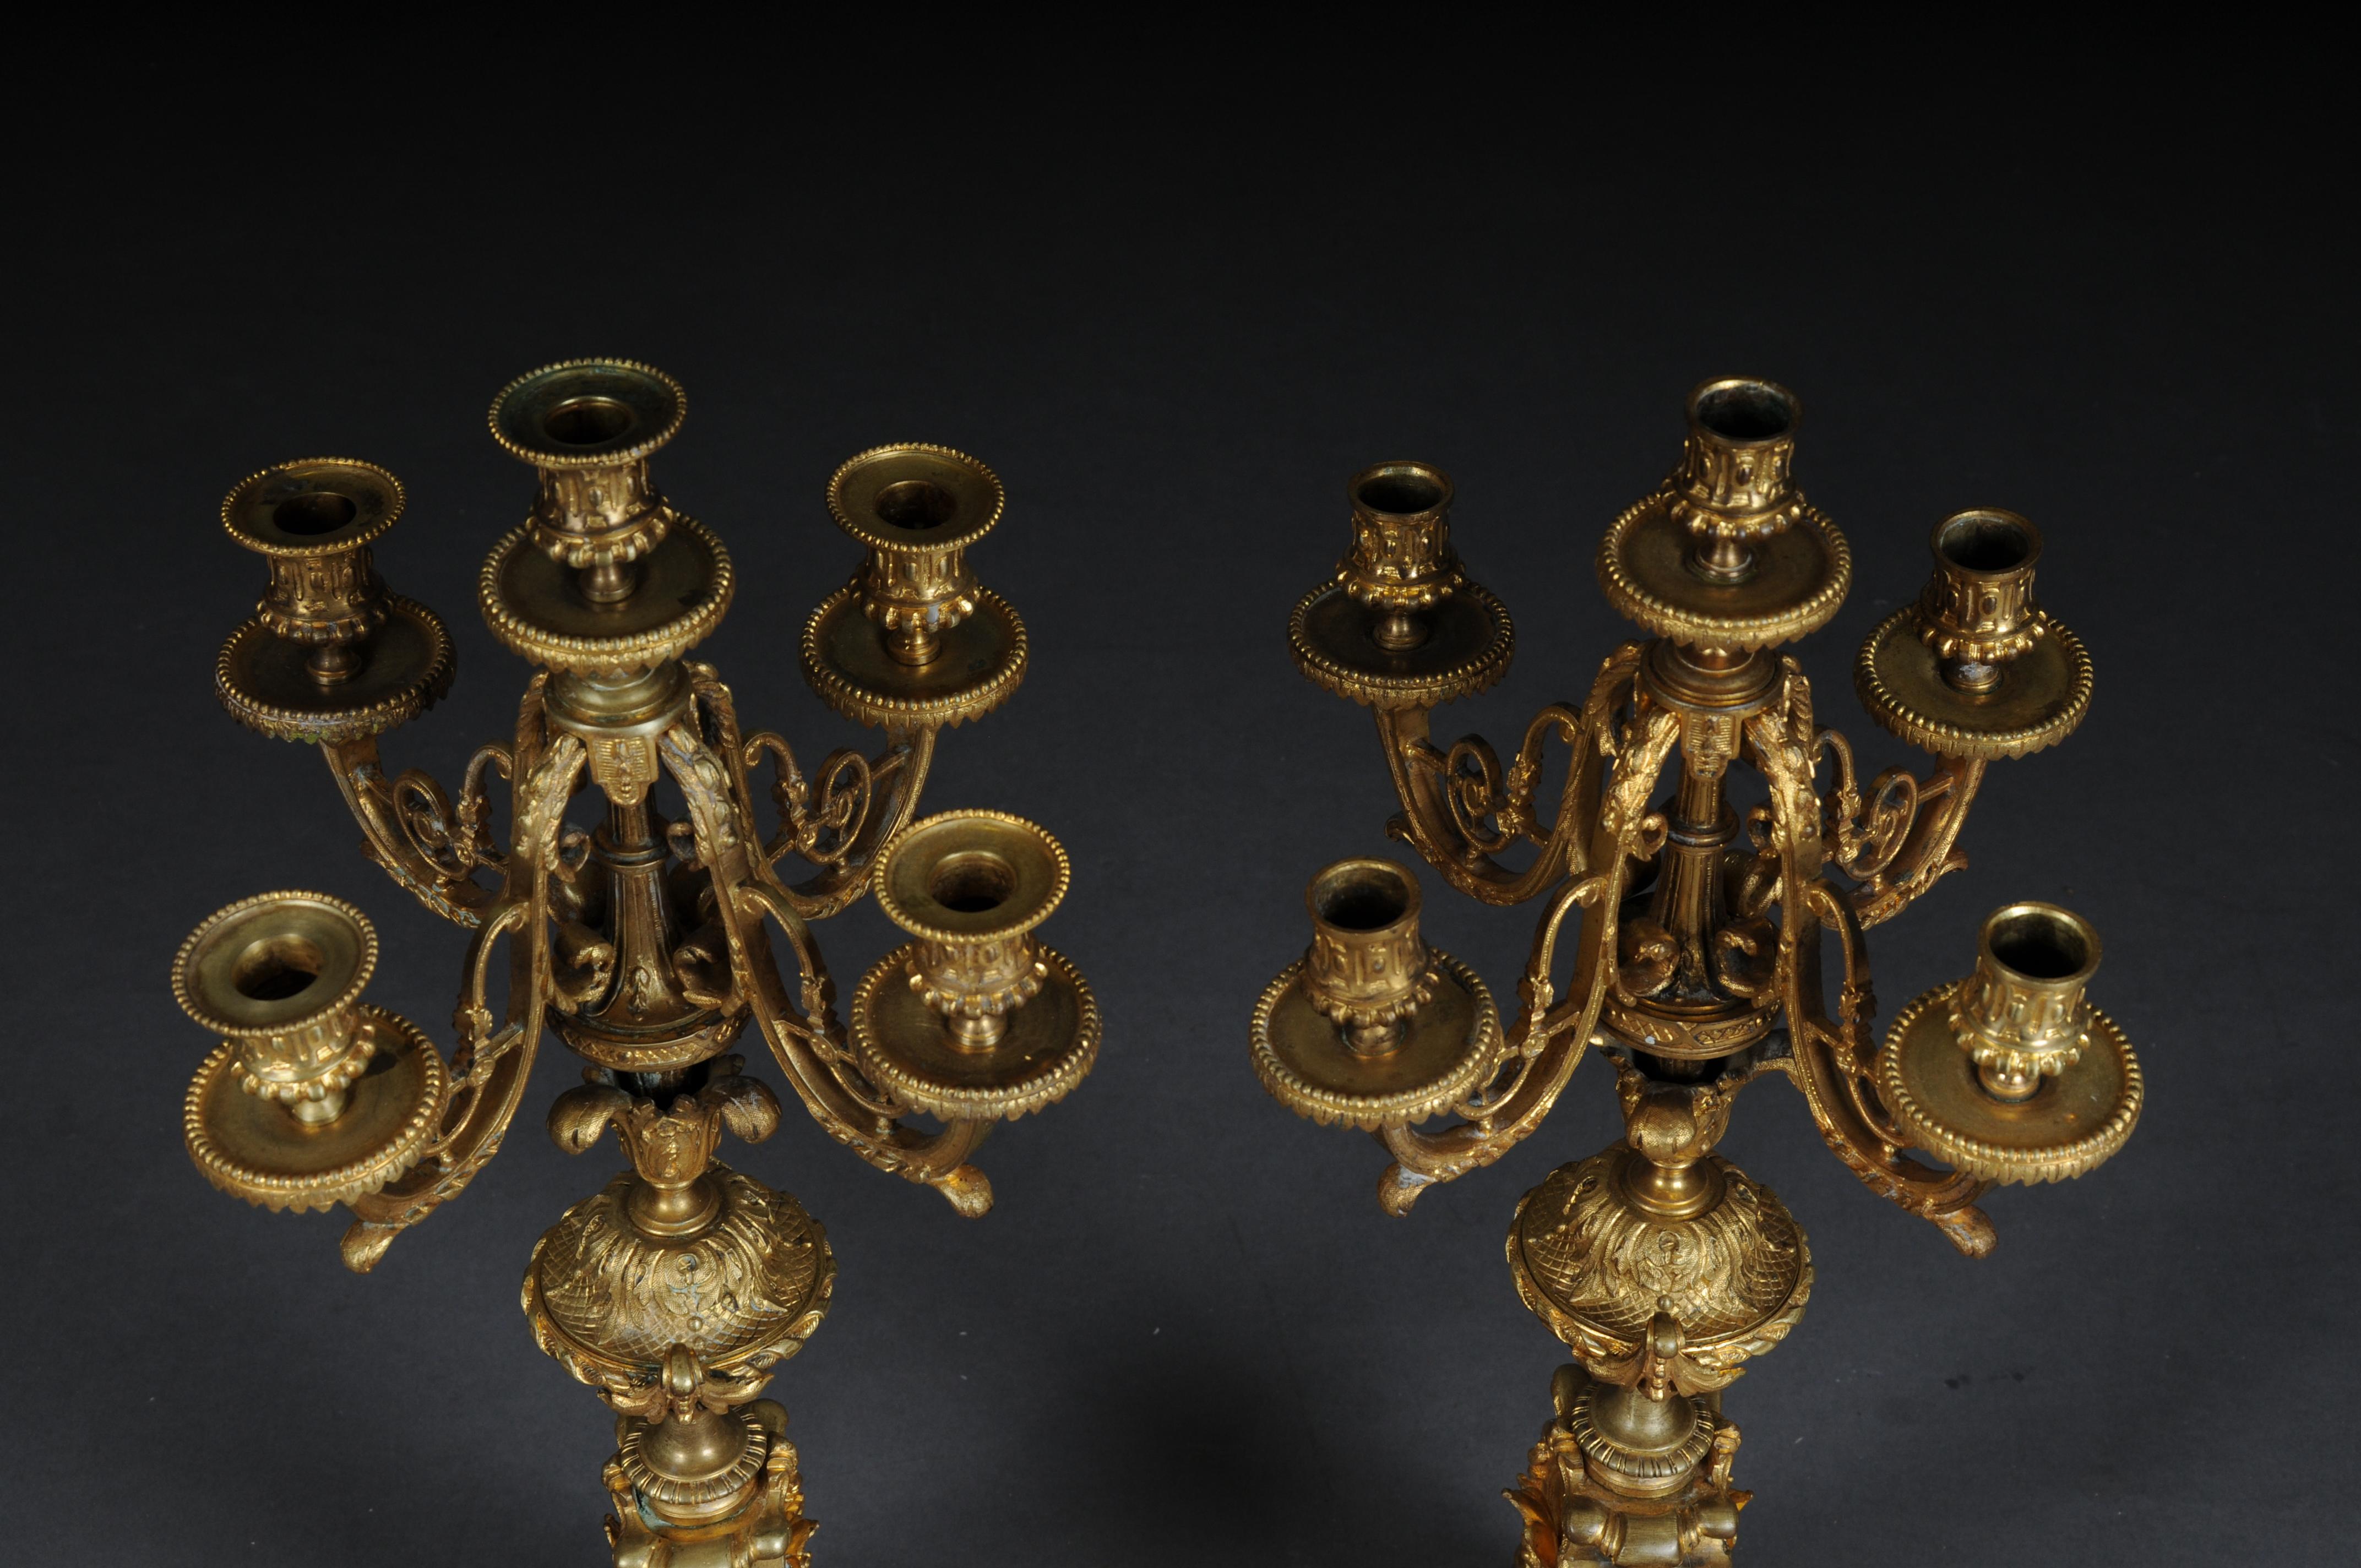 Pair (2) French historicism candlesticks, gilded bronze circa 1880 For Sale 10